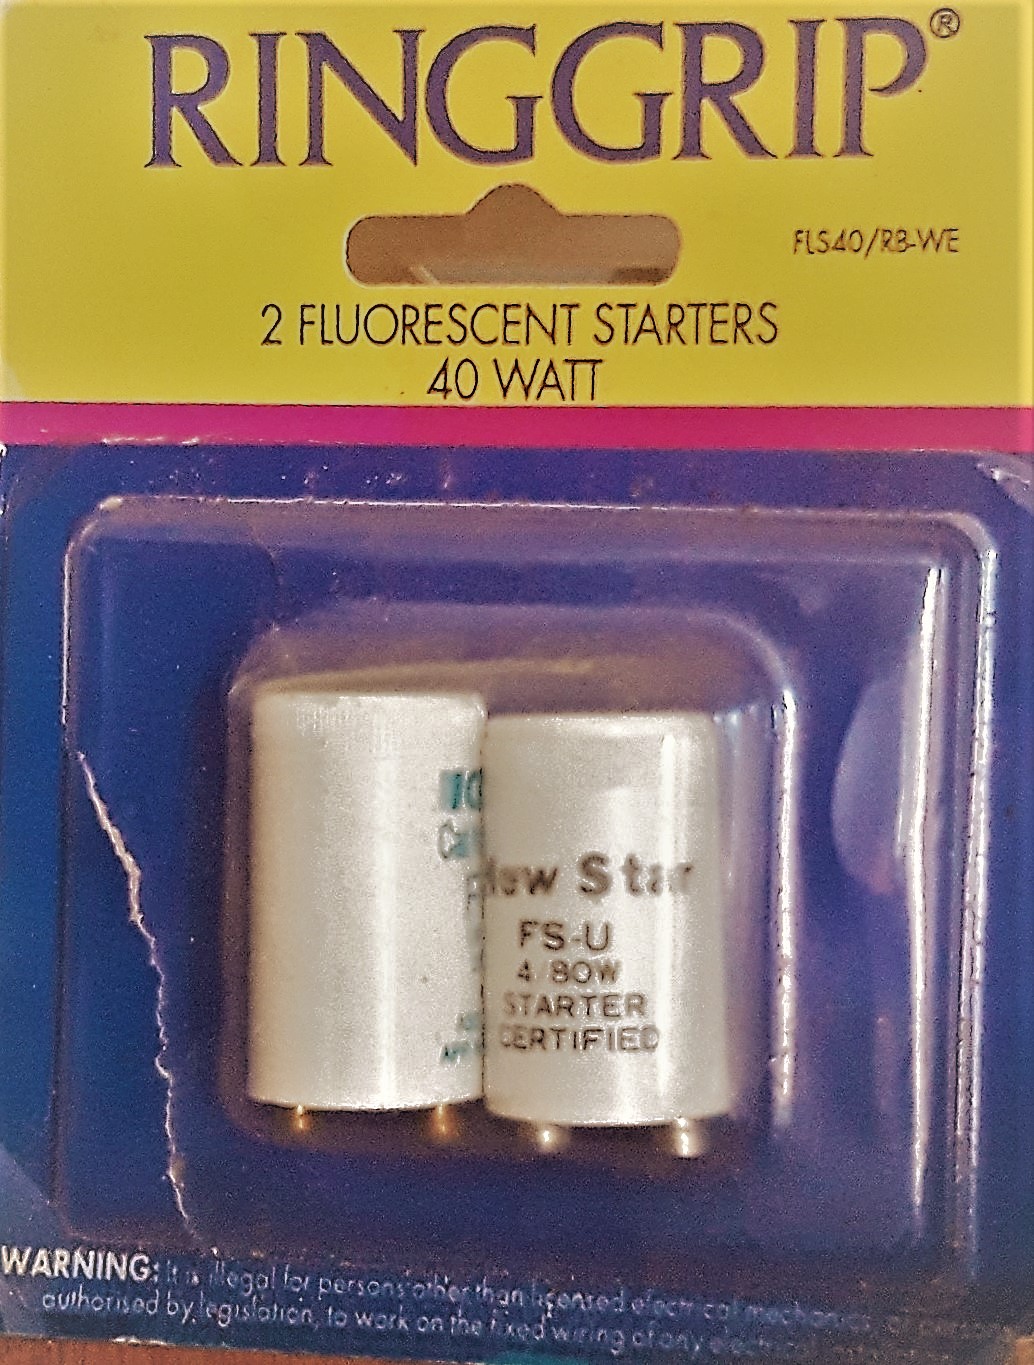 Packet with 2 flourescent light starters